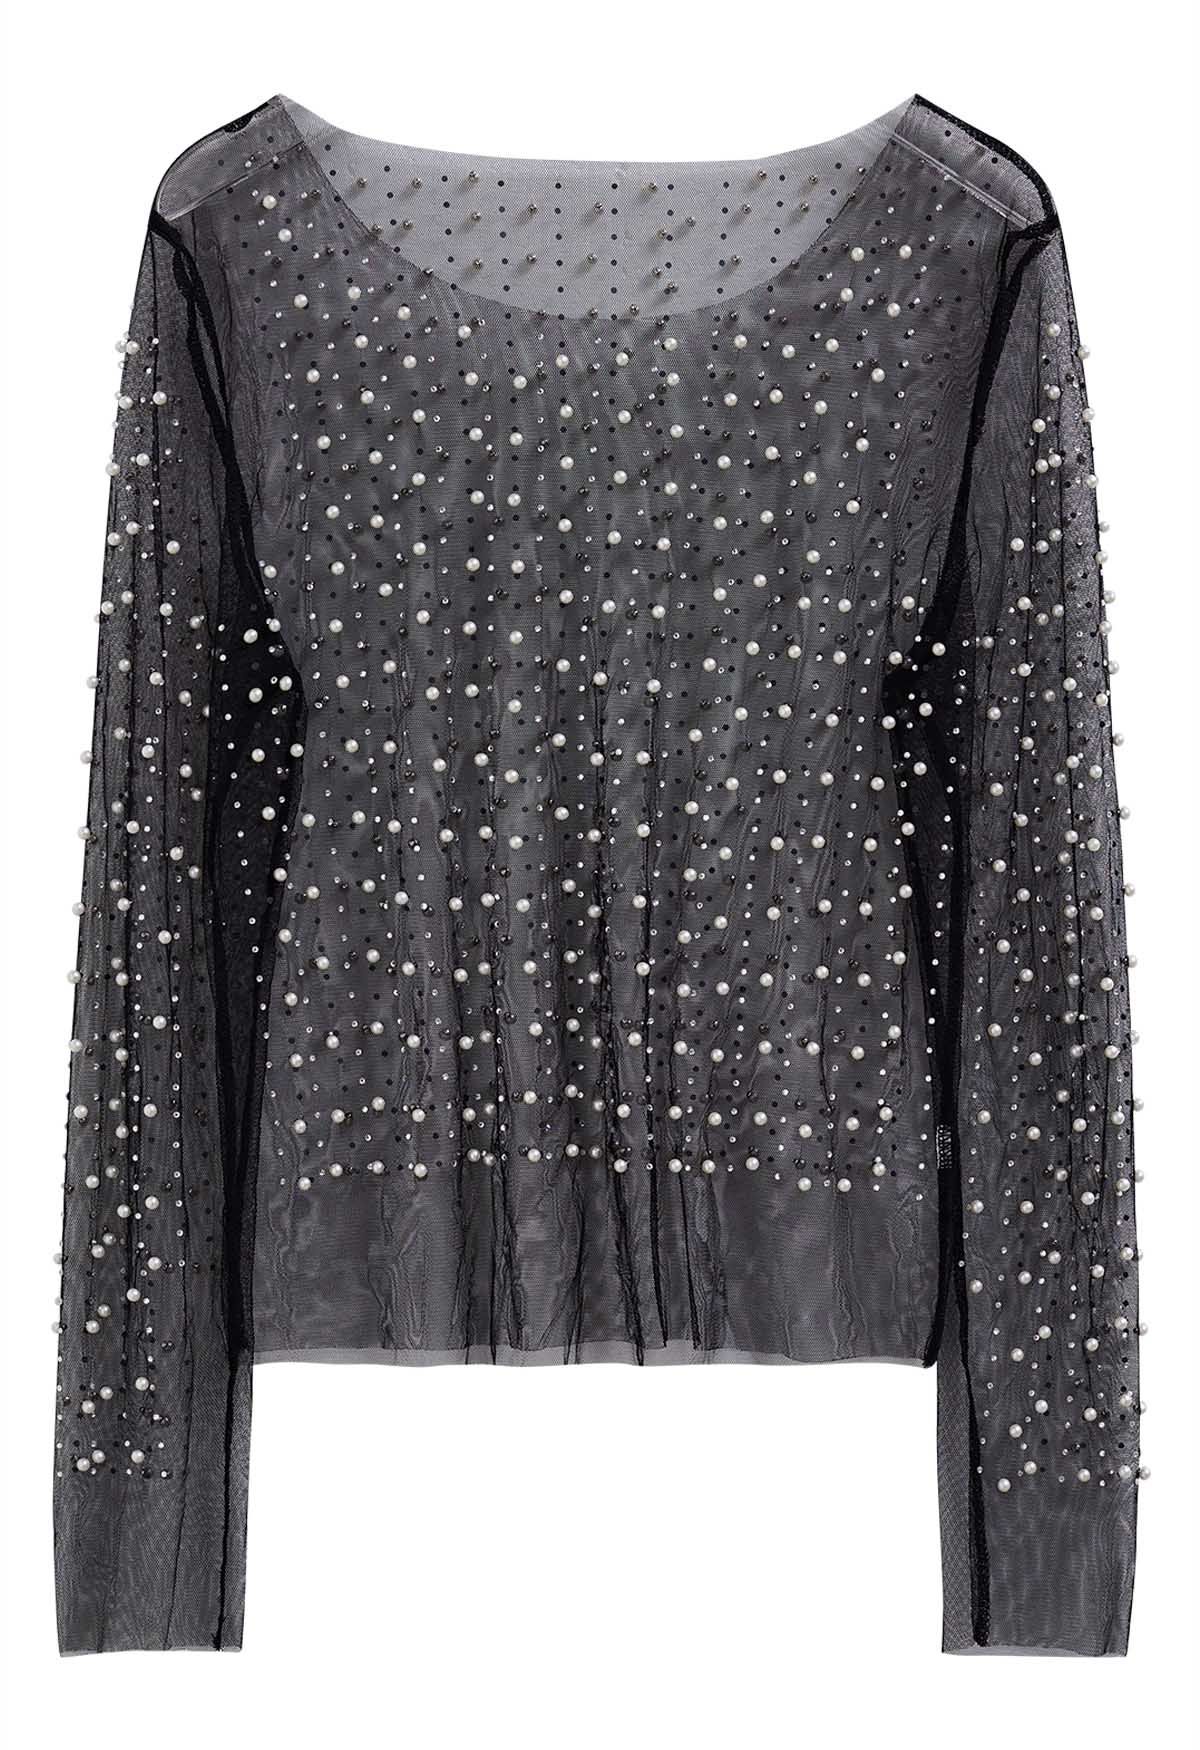 Full Pearl Embellished Sheer Mesh Top in Black - Retro, Indie and Unique  Fashion